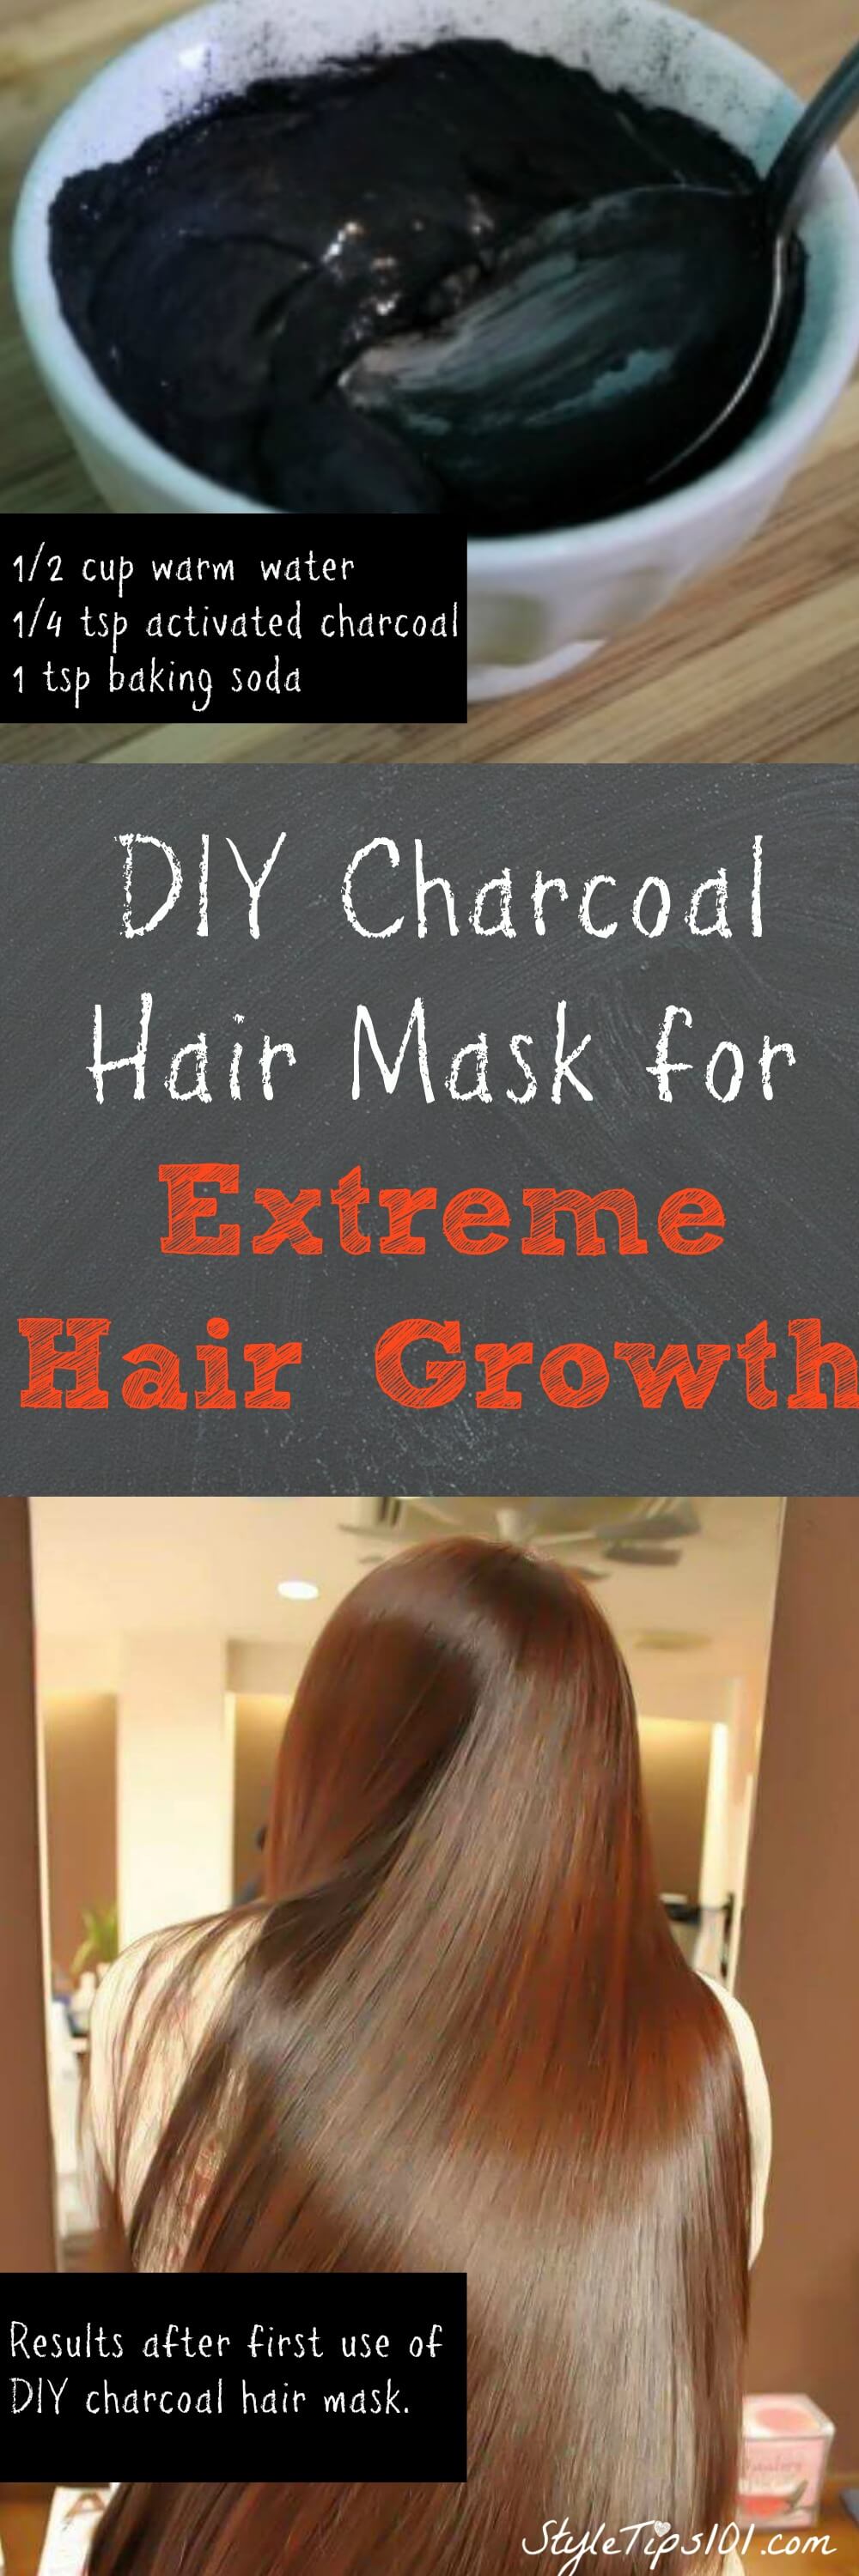 DIY Activated Charcoal Hair Mask